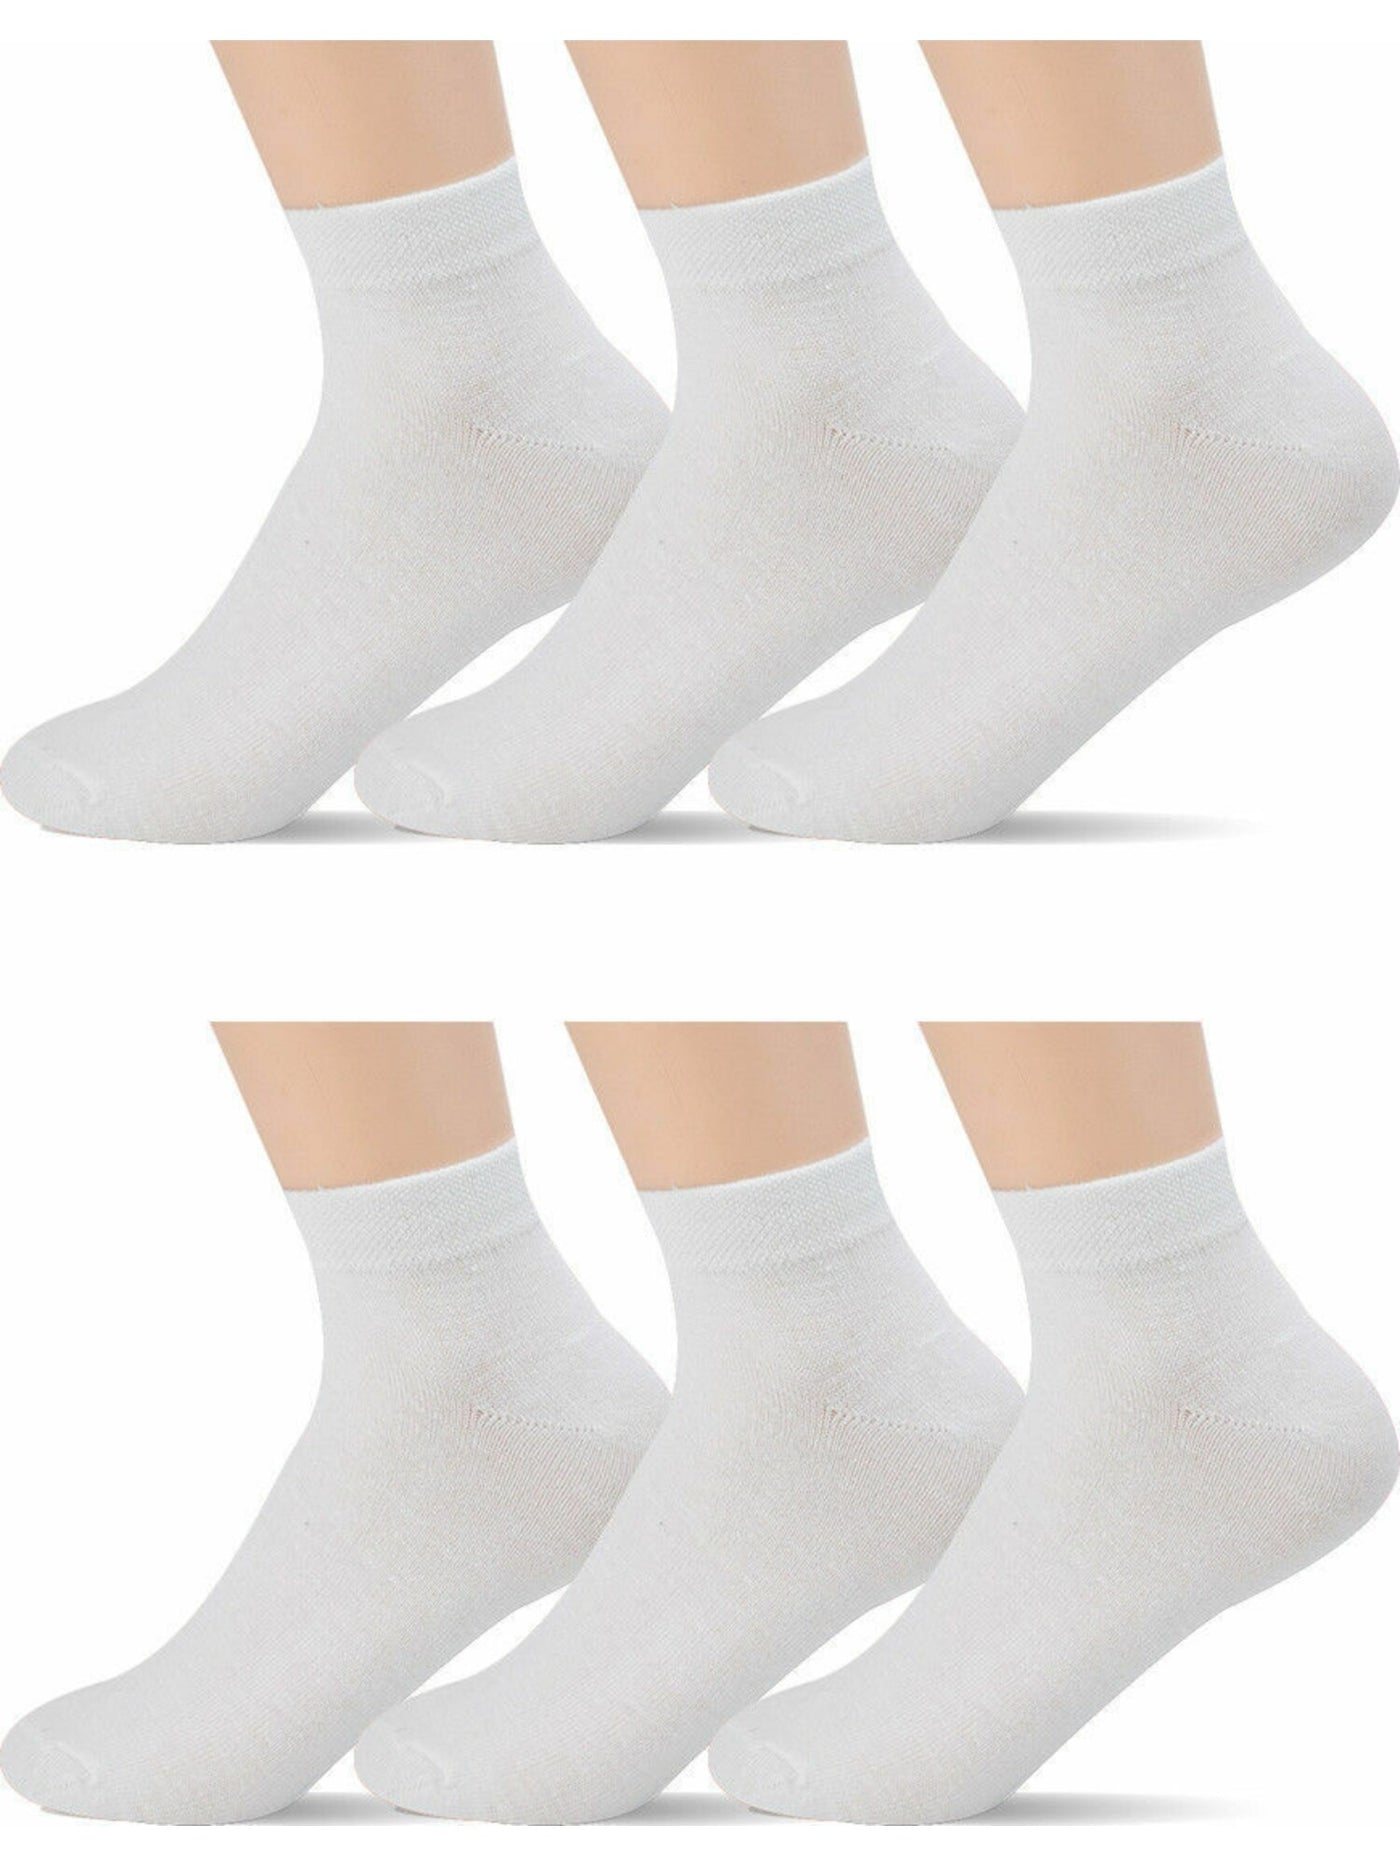 SPORT BY GREAT Mens 3 Pack White Cushioned Casual Crew Socks 10-13